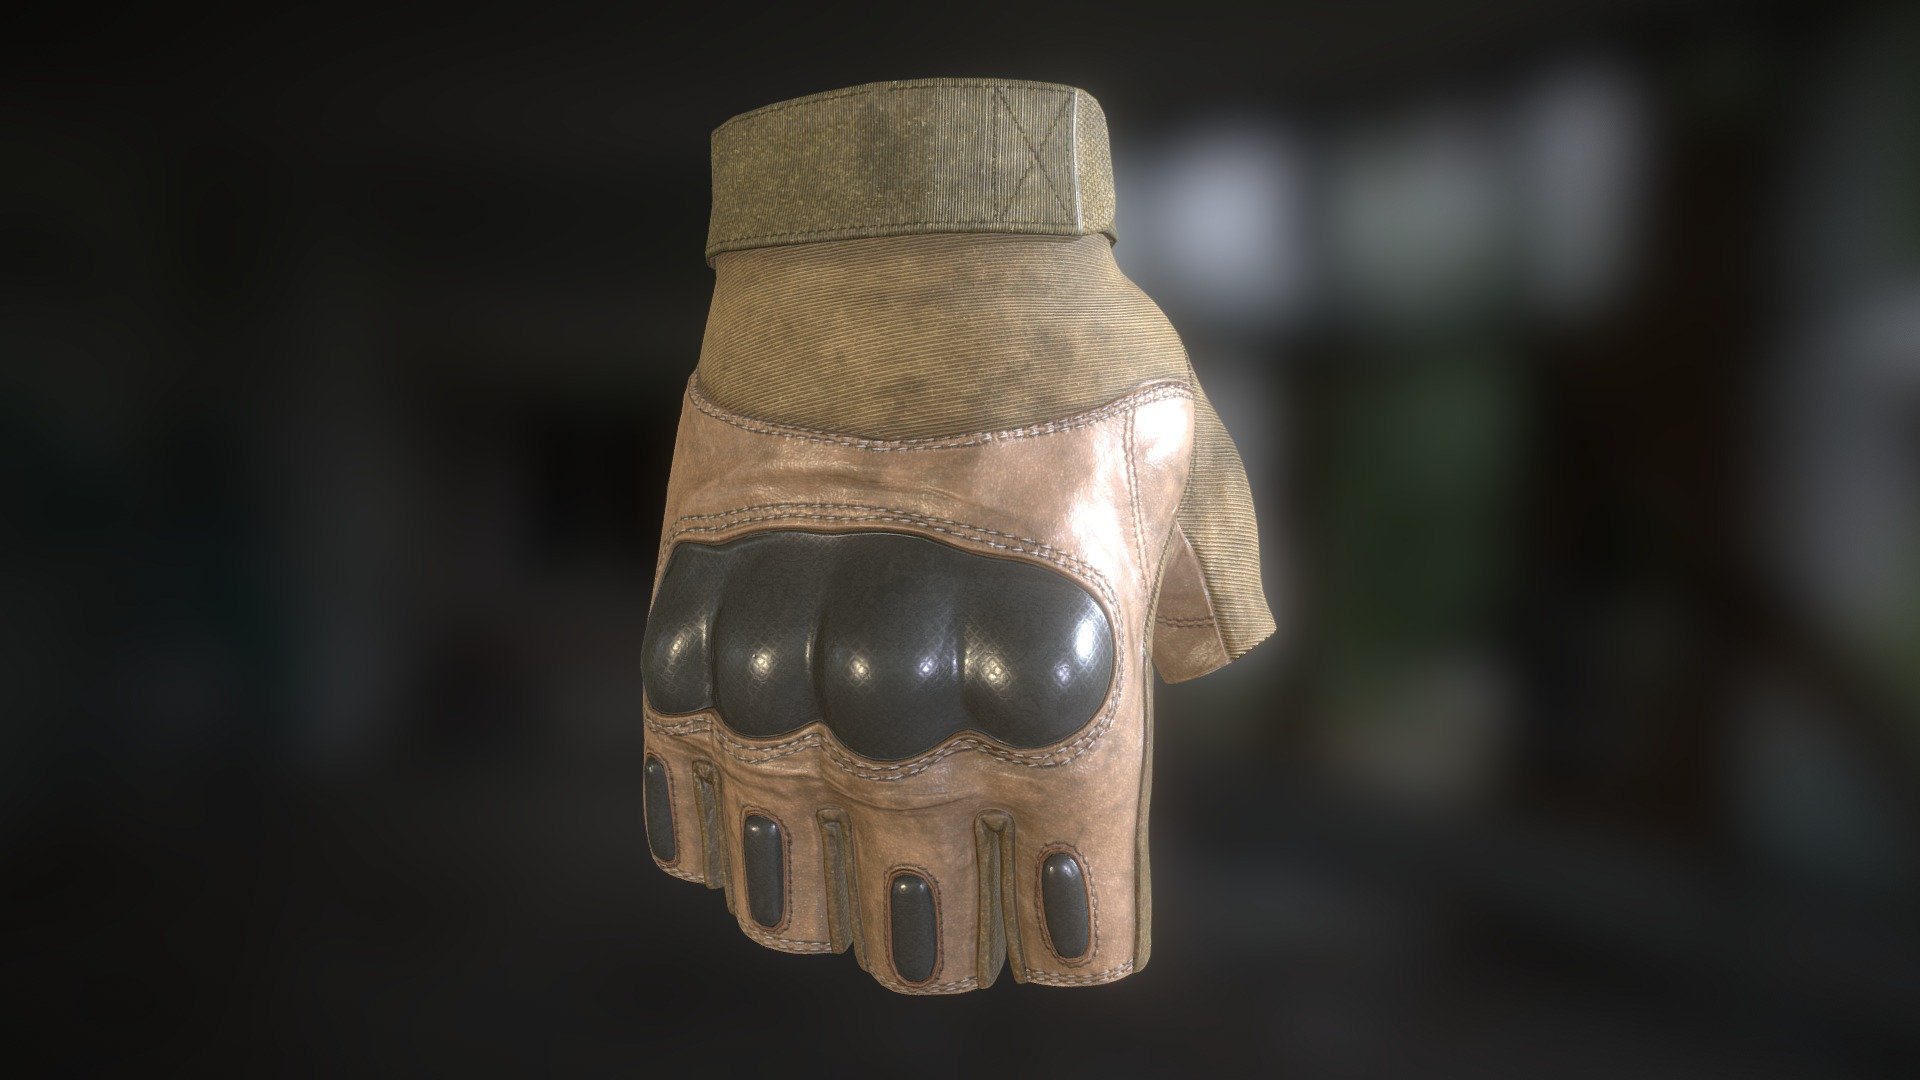 Tactical Glove asset made in 2020. Was also a great study creating the military's  gear. and to learn more substance painter. which made me use patterns and Grunges alongside ZBrush bakes. was such a fun process in

Hope you like it guys ! Stay tuned for more millitary Grade Equipment (Props) 3d model